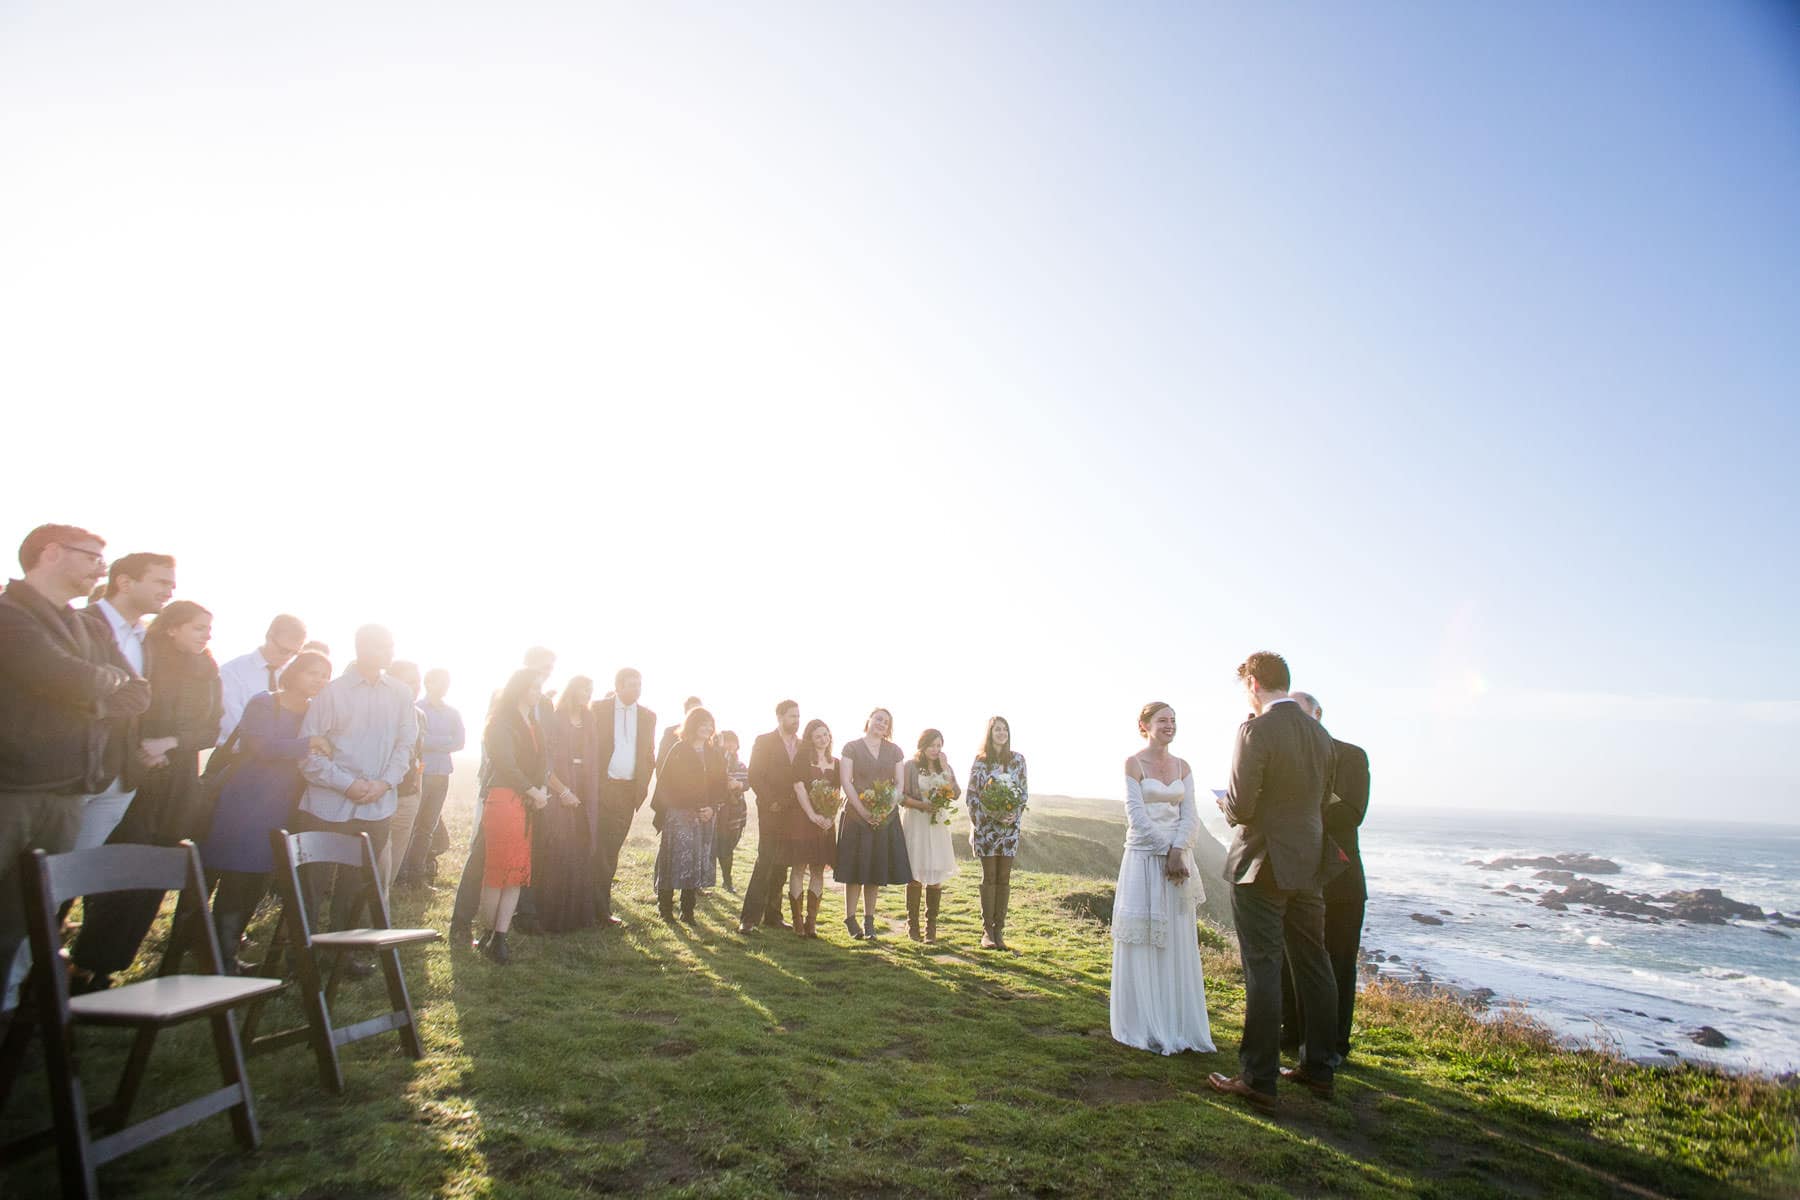 wedding guests and couple at wedding ceremony on bluff overlooking the ocean